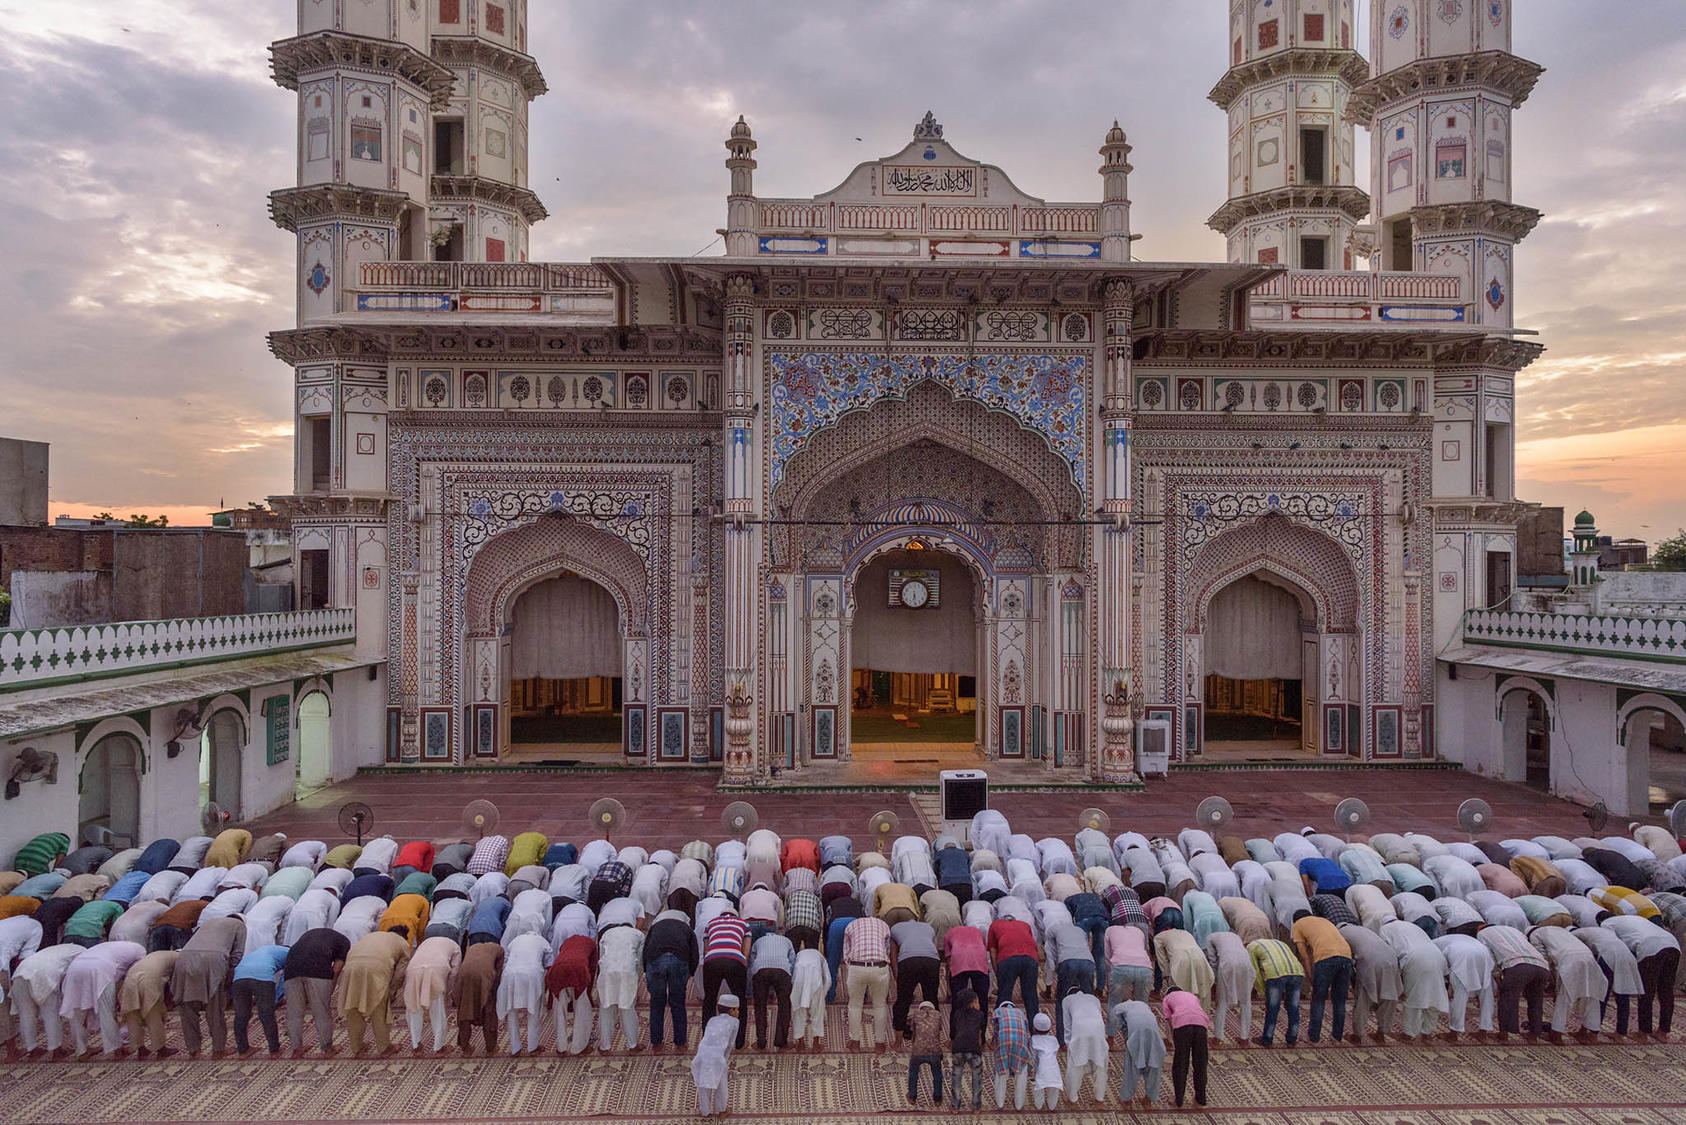 Muslims pray at a mosque in Tonk, India, on Sept. 28, 2019. (Smita Sharma/The New York Times)